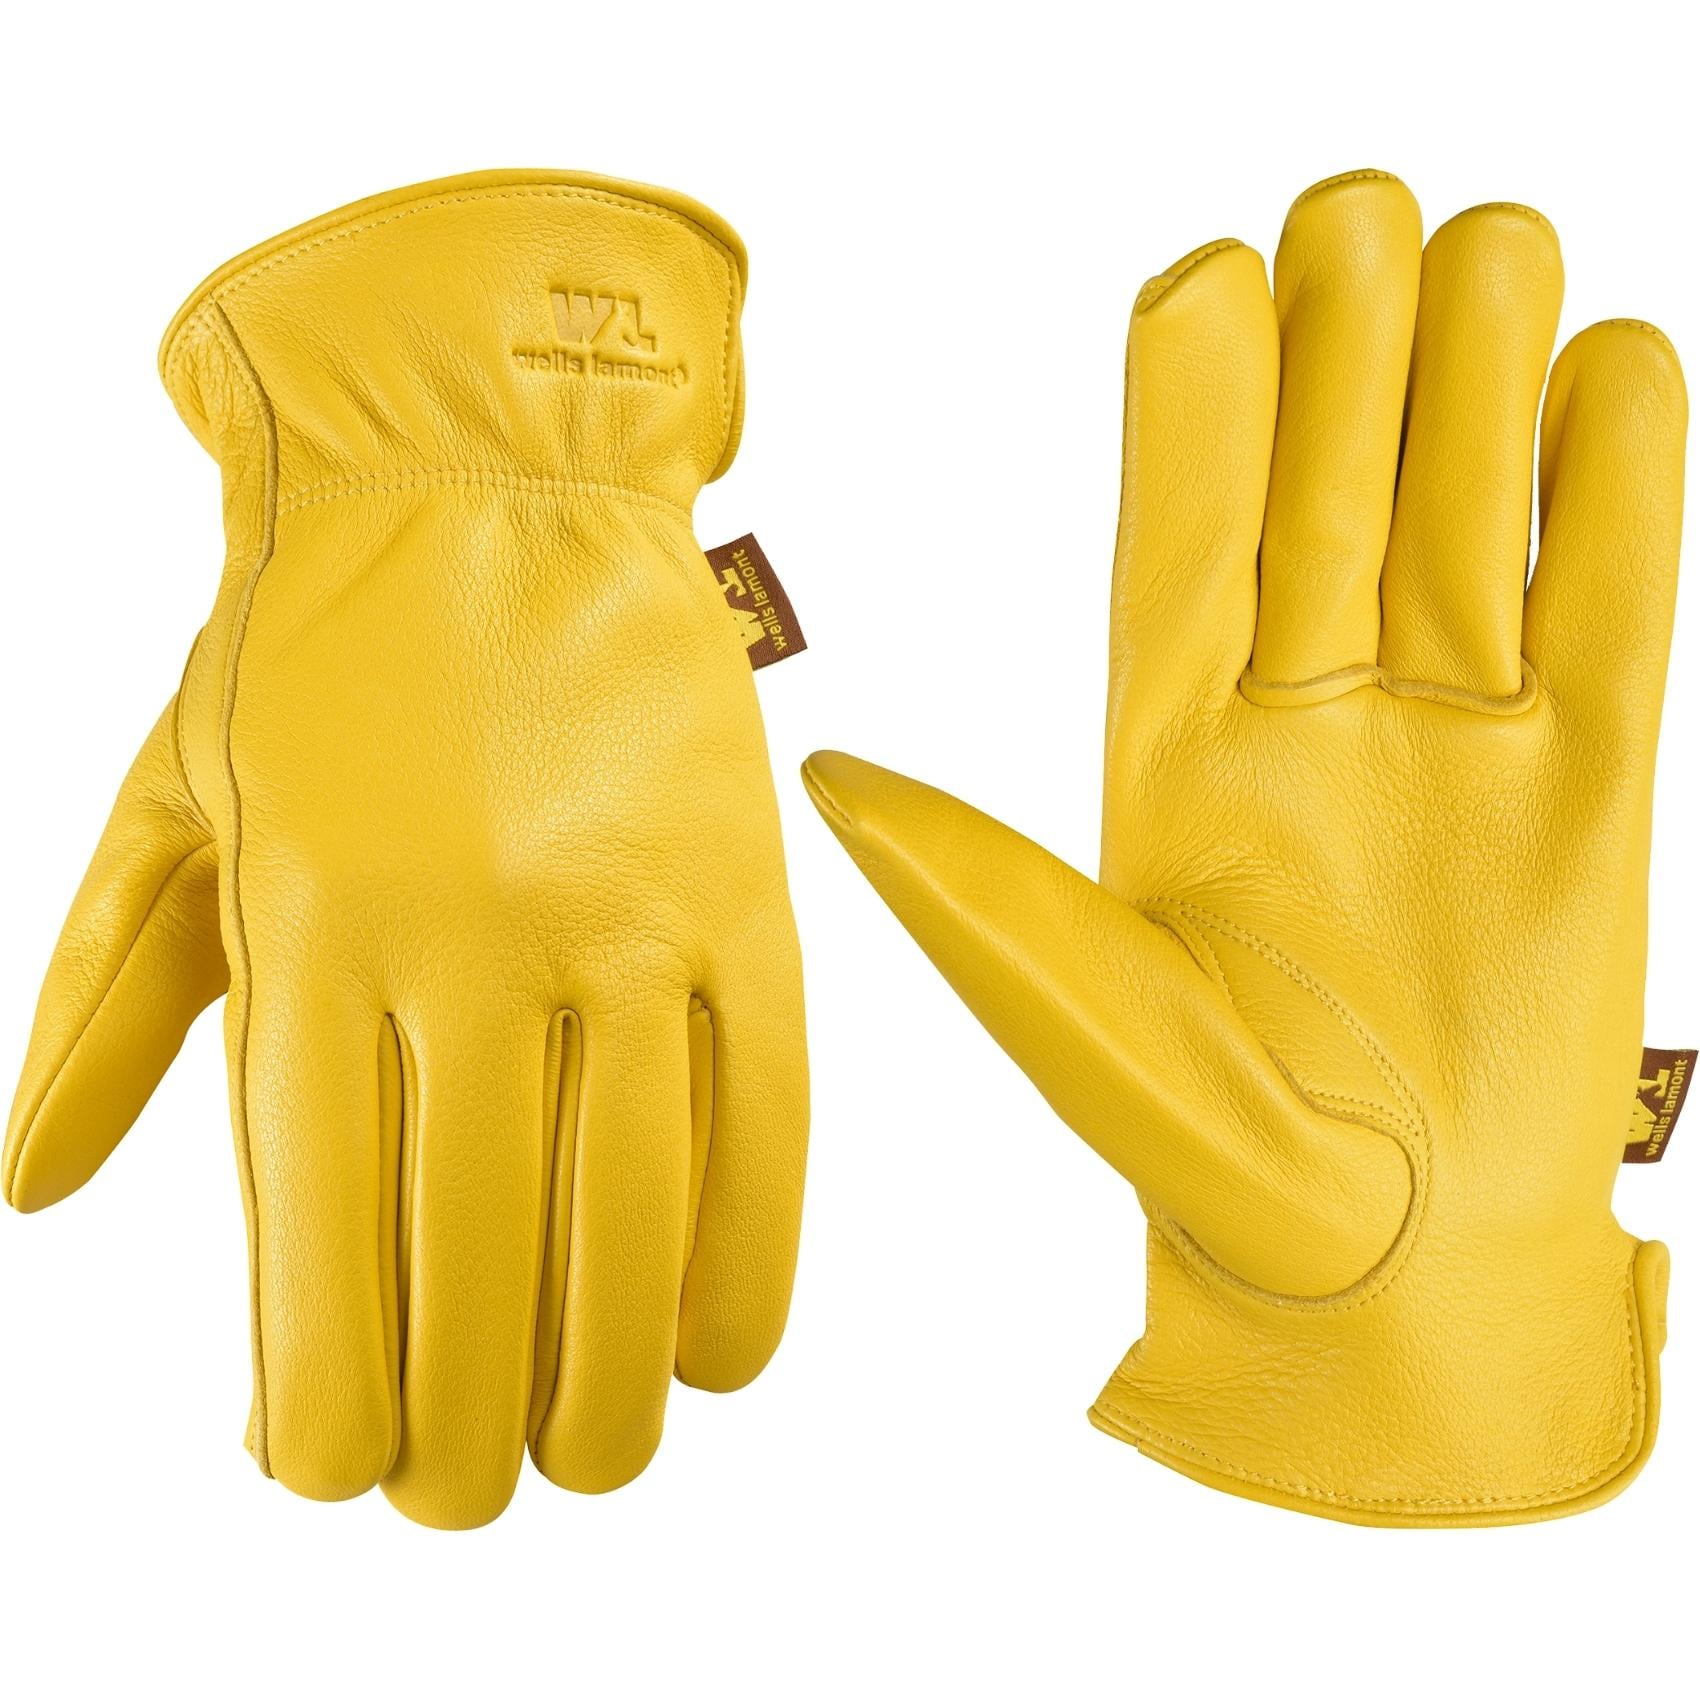 2 Pack Leather Work Gloves Premium Wells Lamont All Purpose Large